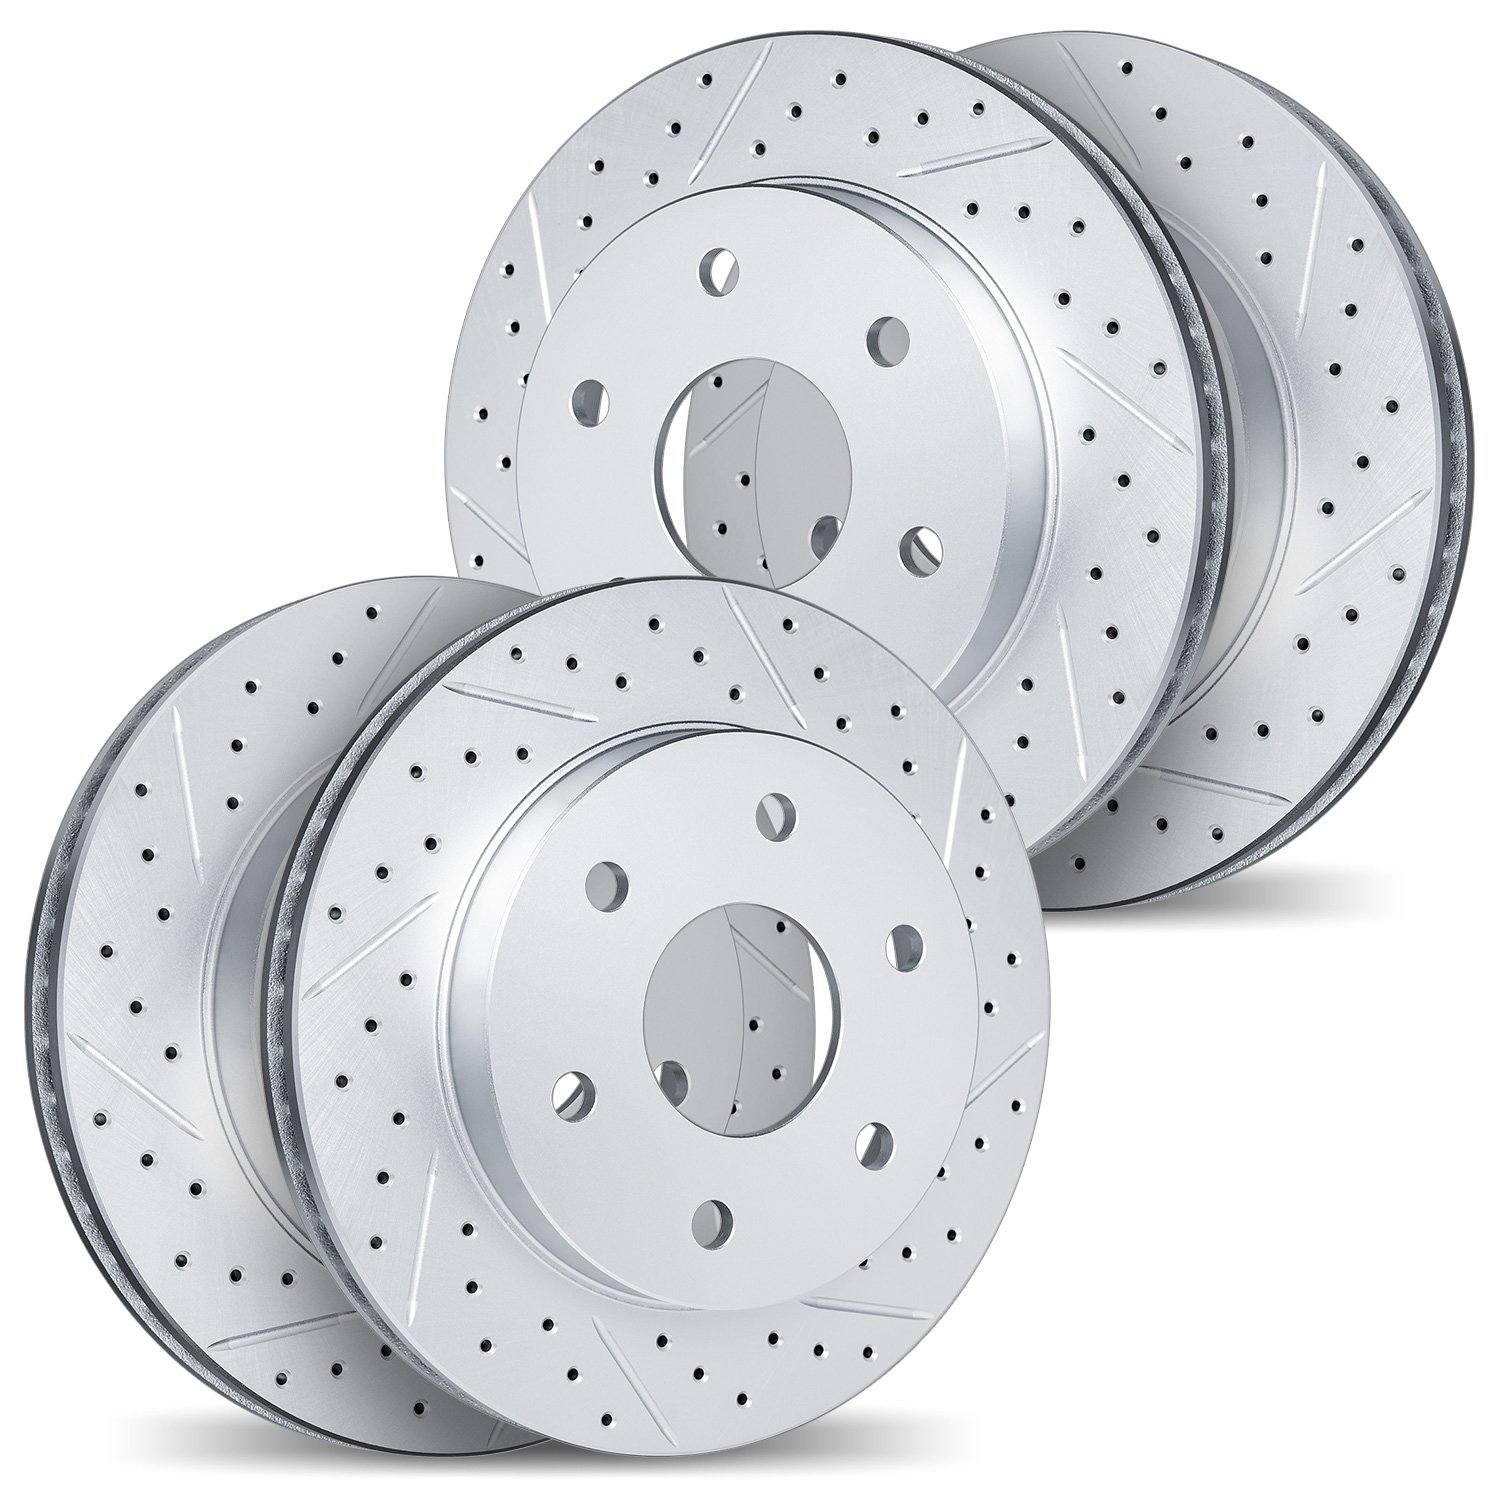 2004-40059 Geoperformance Drilled/Slotted Brake Rotors, 2003-2017 Mopar, Position: Front and Rear